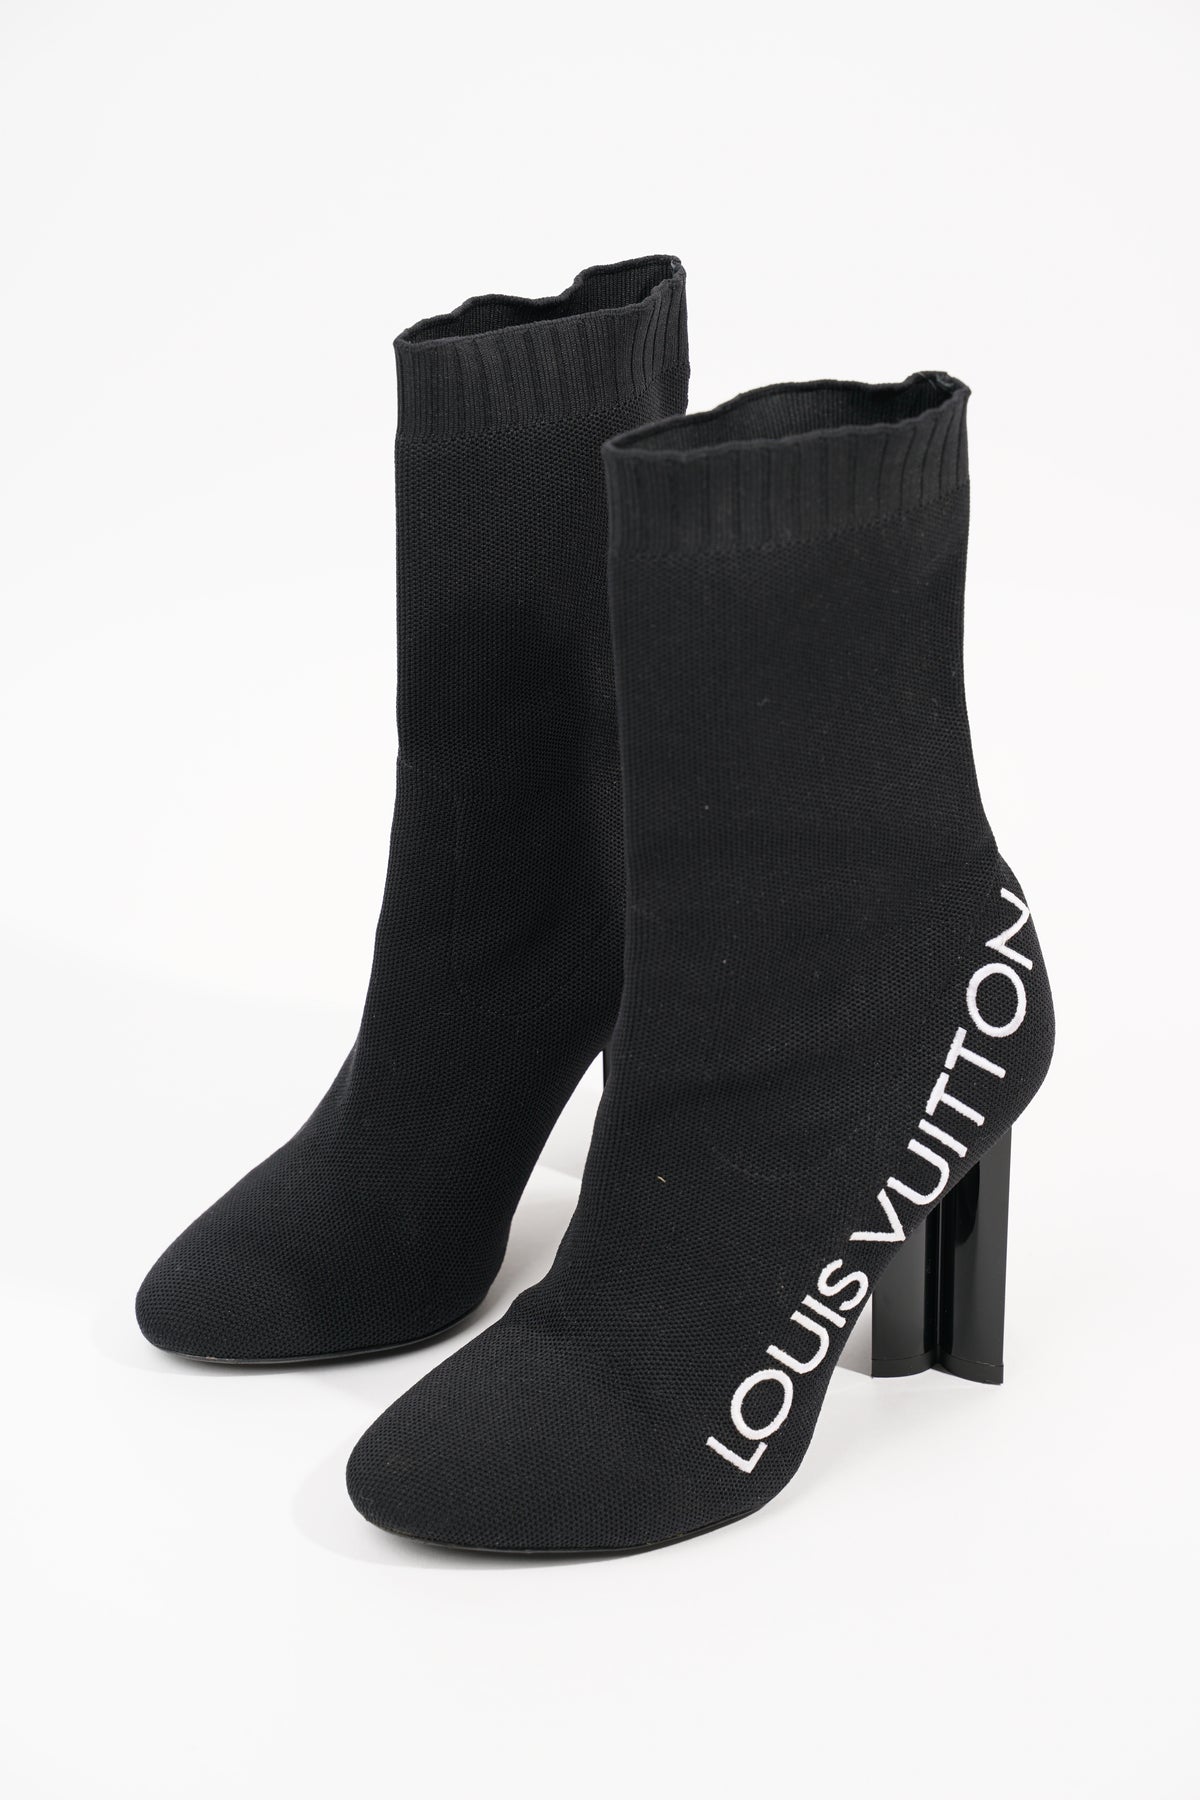 Louis Vuitton® LV X Yk Silhouette Ankle Boot Black. Size 41.0 in